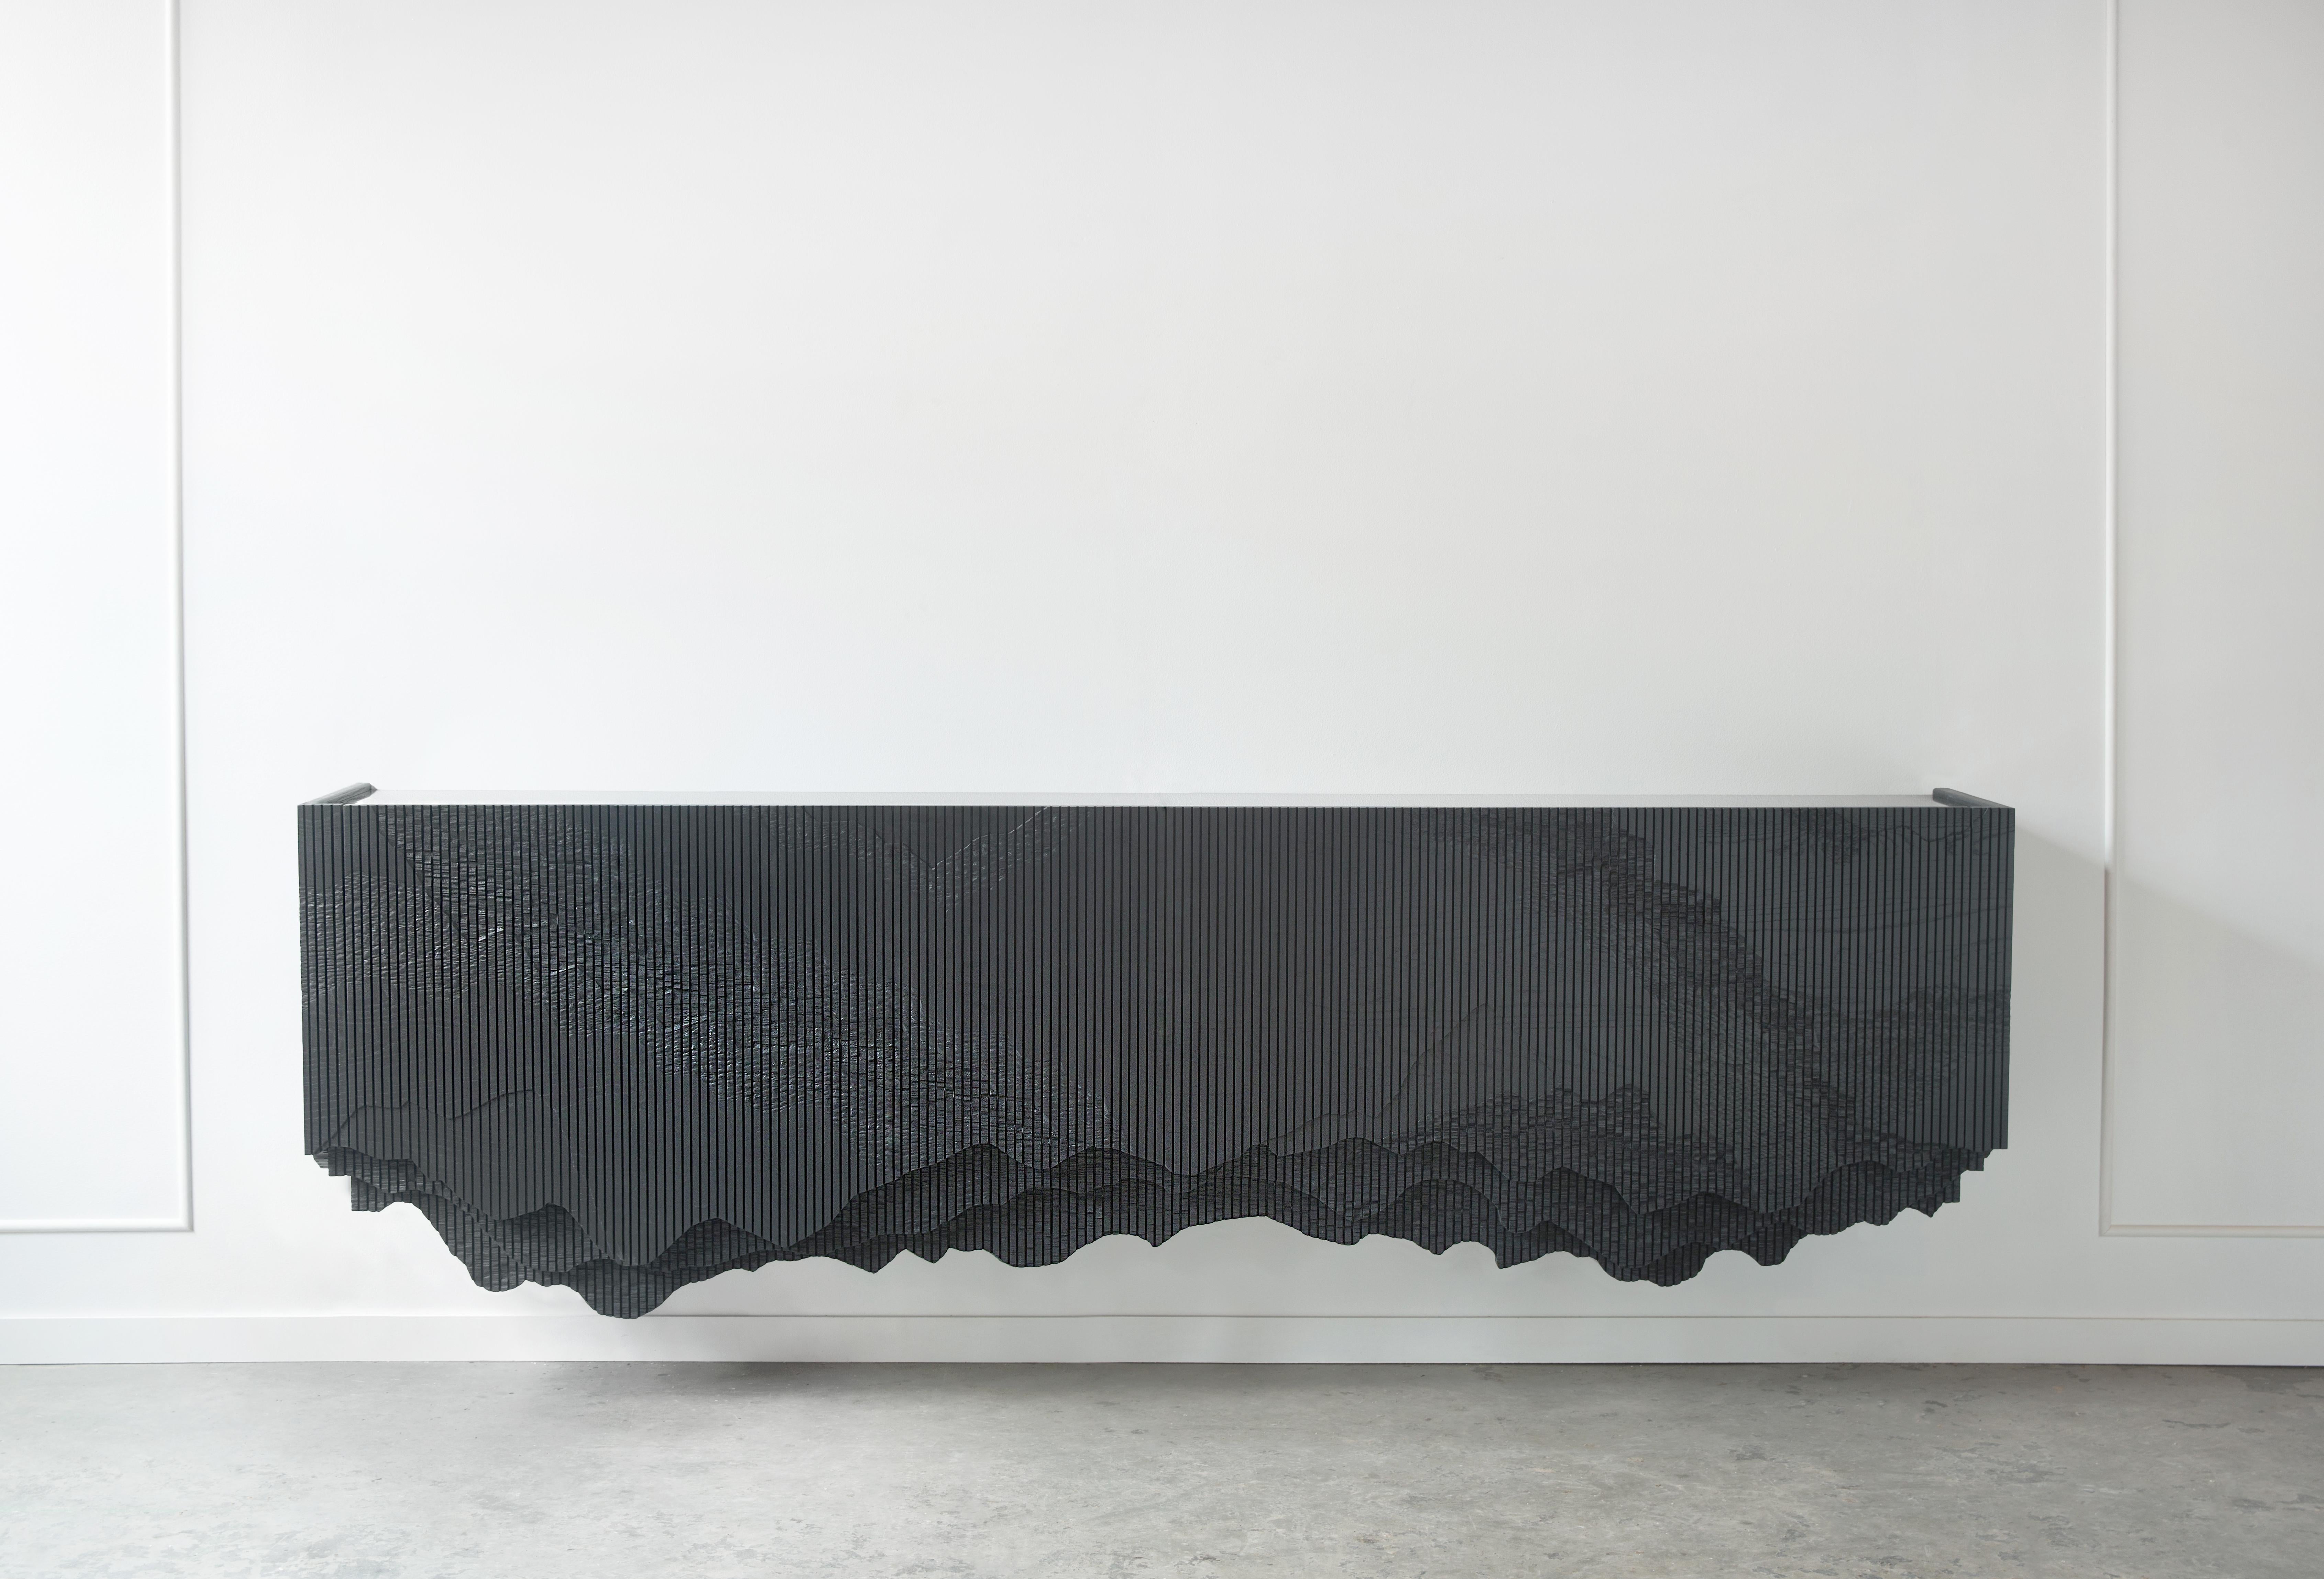 Ledge is a floating console, mounted to the wall, in solid ash with a black glass top. It stems from material exploration inspired by the cliffs around Johns’ studio, making solid ash reference crumbling stone through a unique technique. The wood